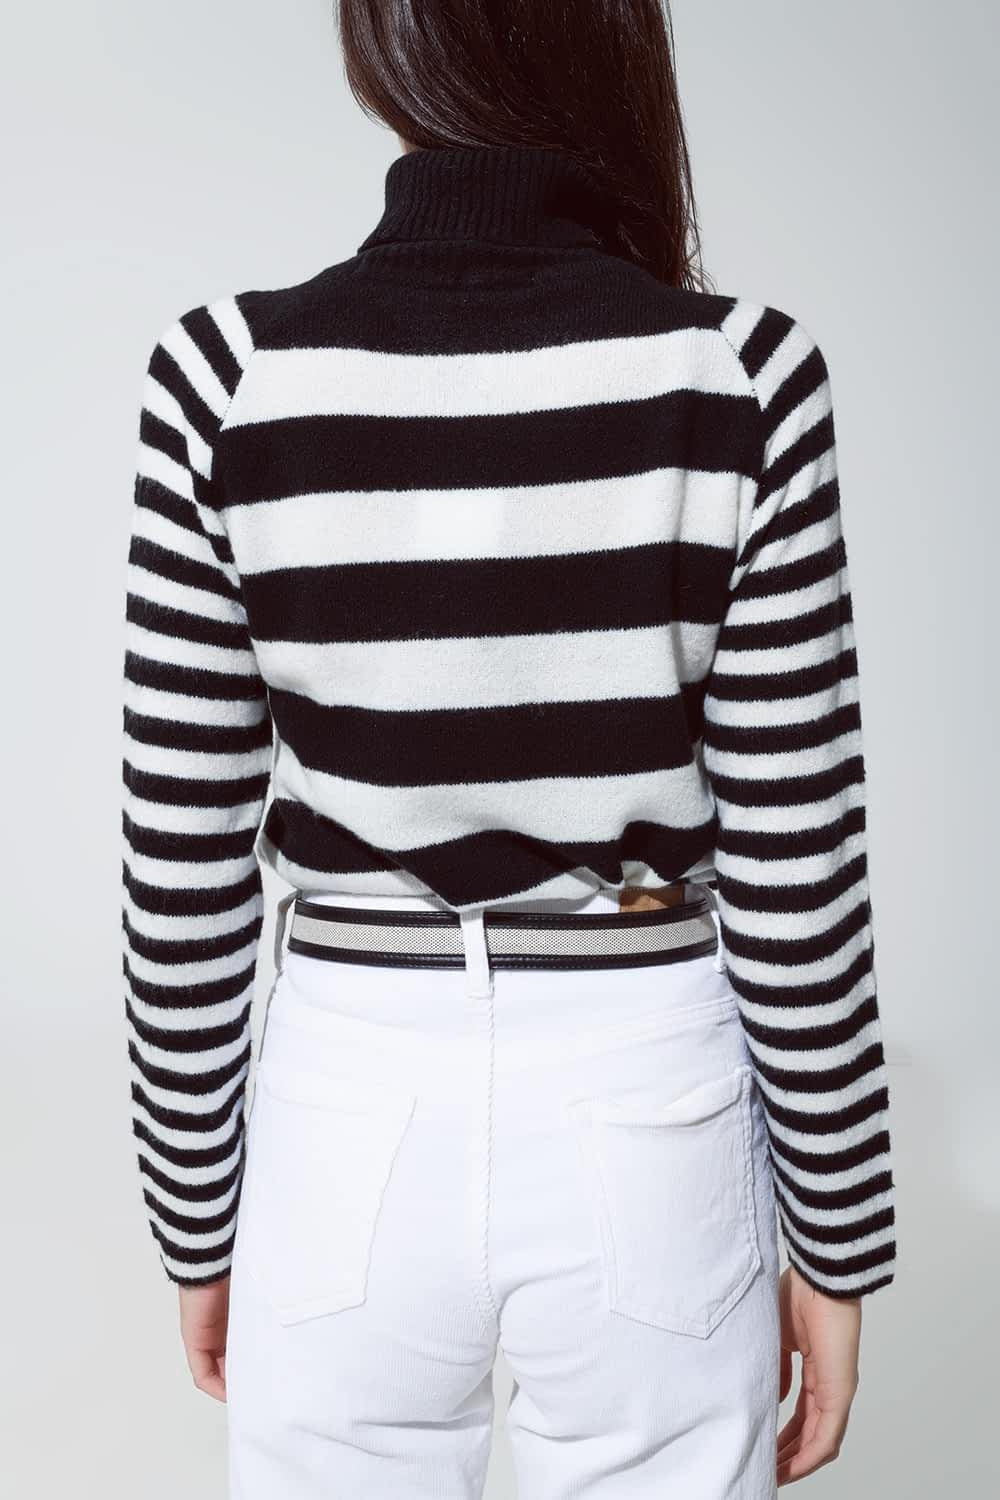 Turtleneck Sweater With Stripes in White and Black